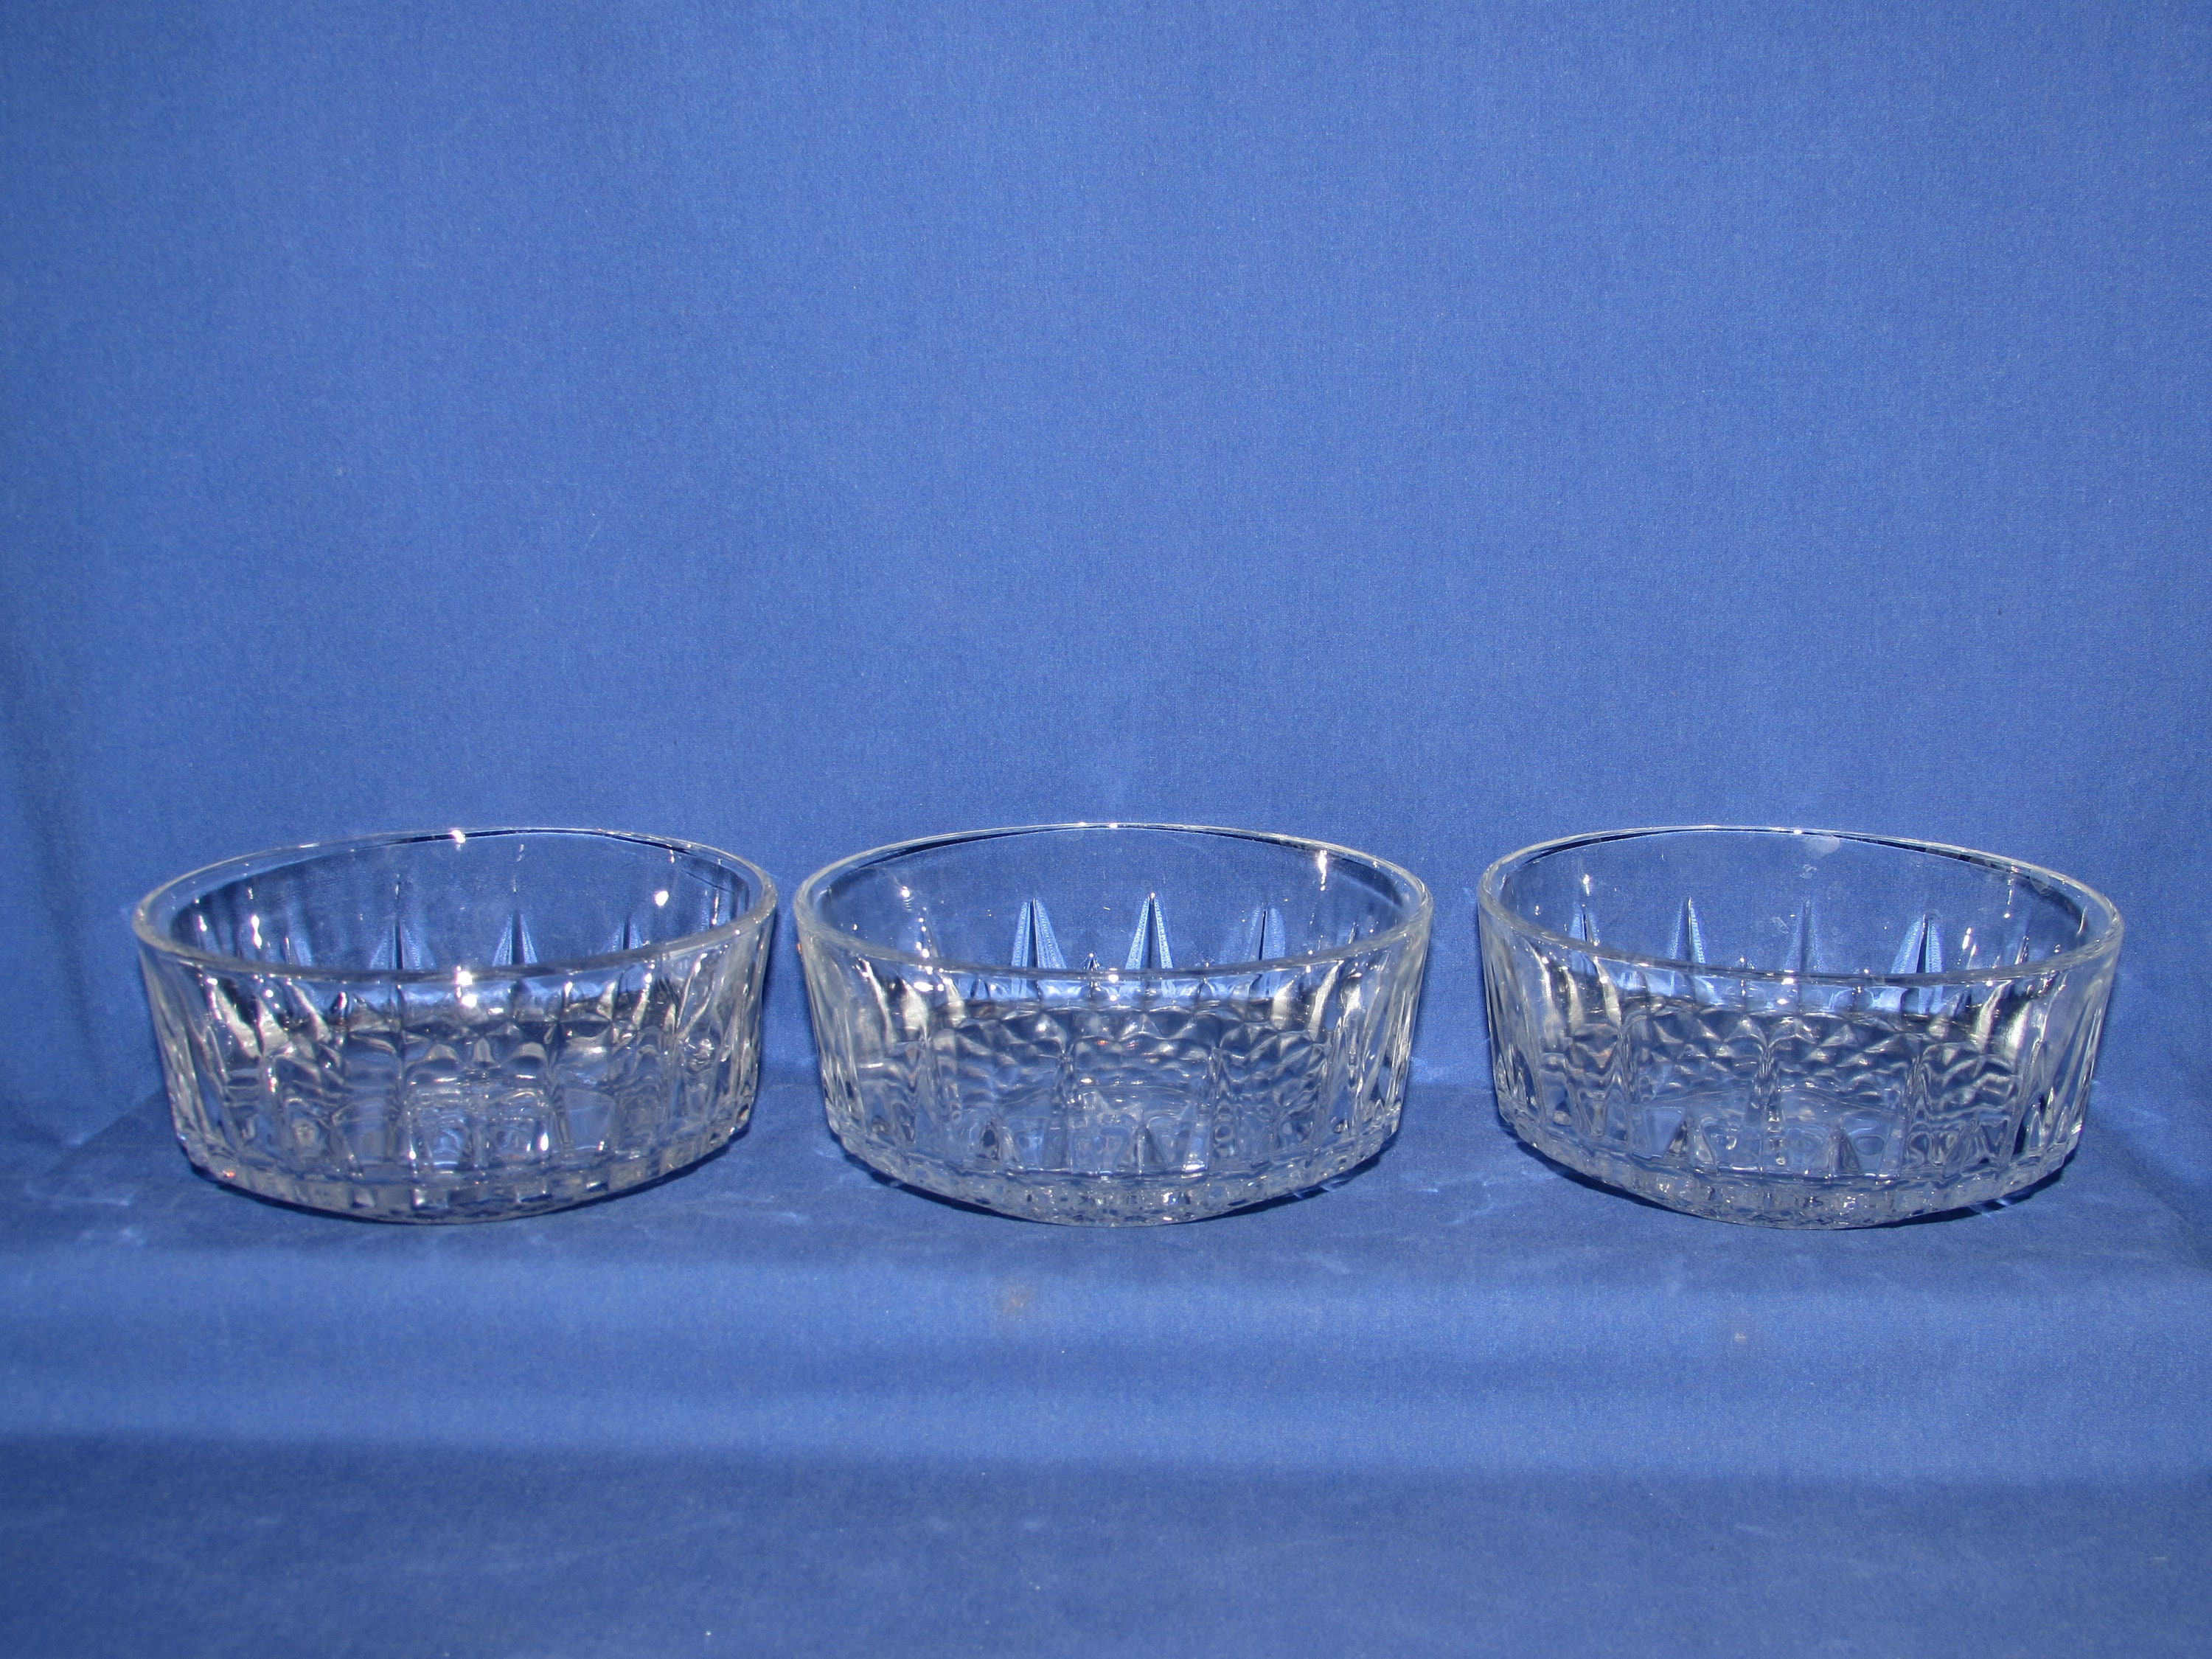 Diamant 7 Piece Salad Bowl Set-Specially Tempered Glass- New in Box.  Vintage-Arcoroc France for Sale in Morton Grove, IL - OfferUp